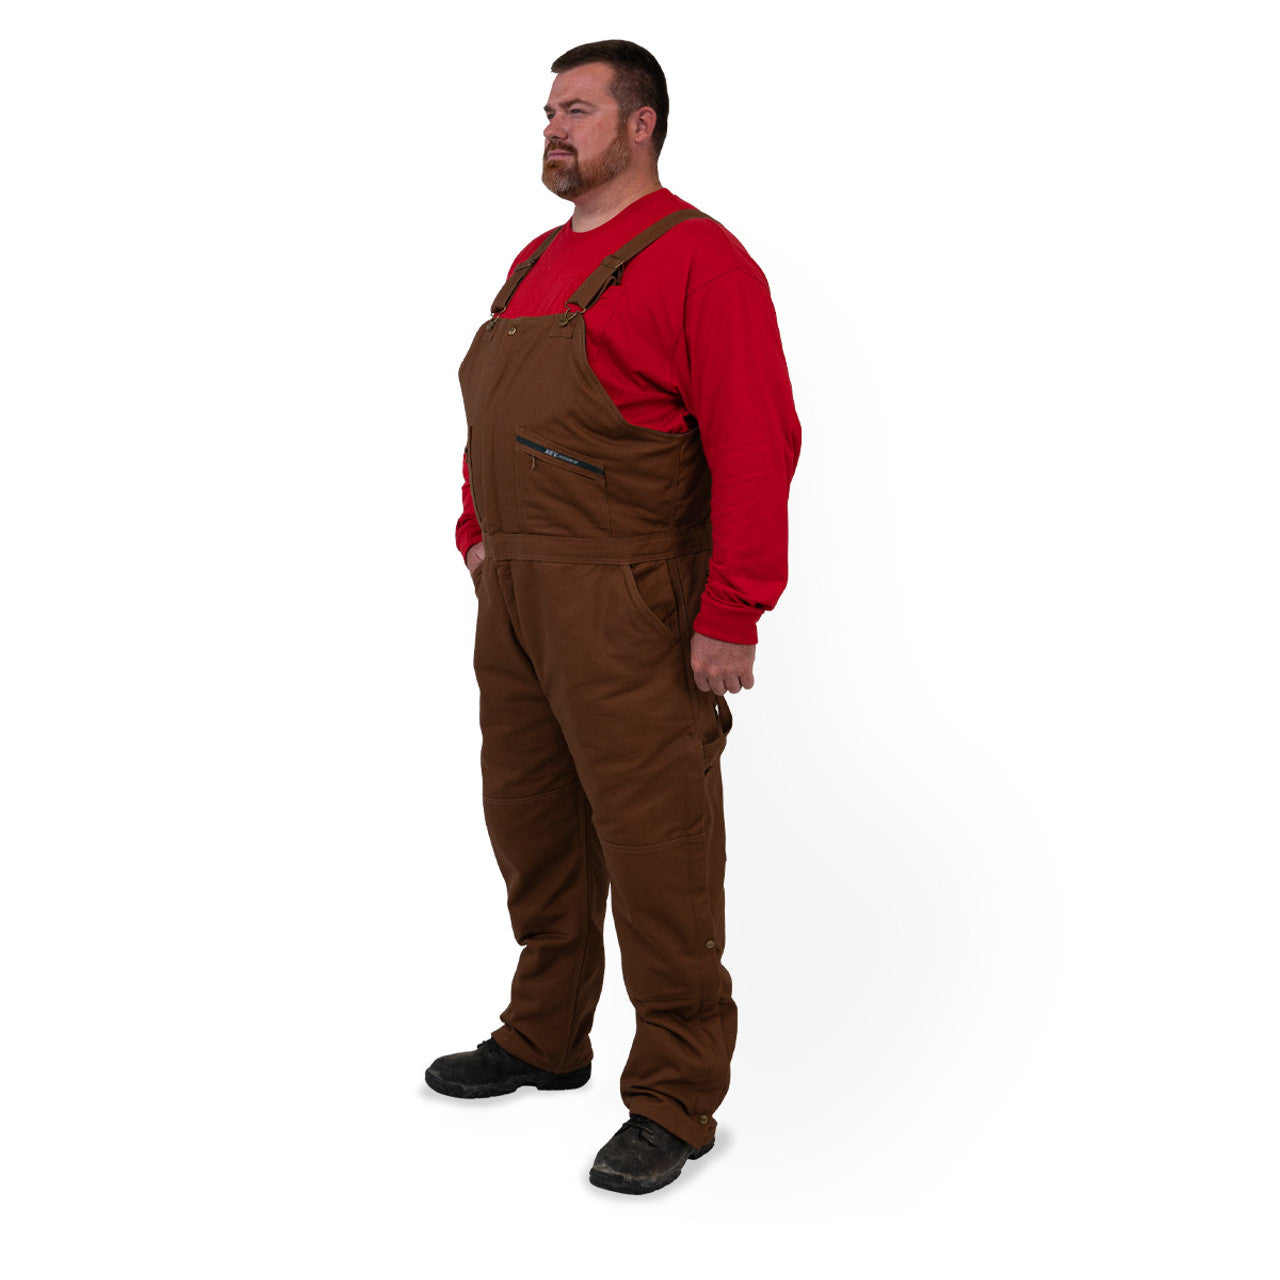 275.29 Men's Insulated Duck Bib Overall by Key Industries